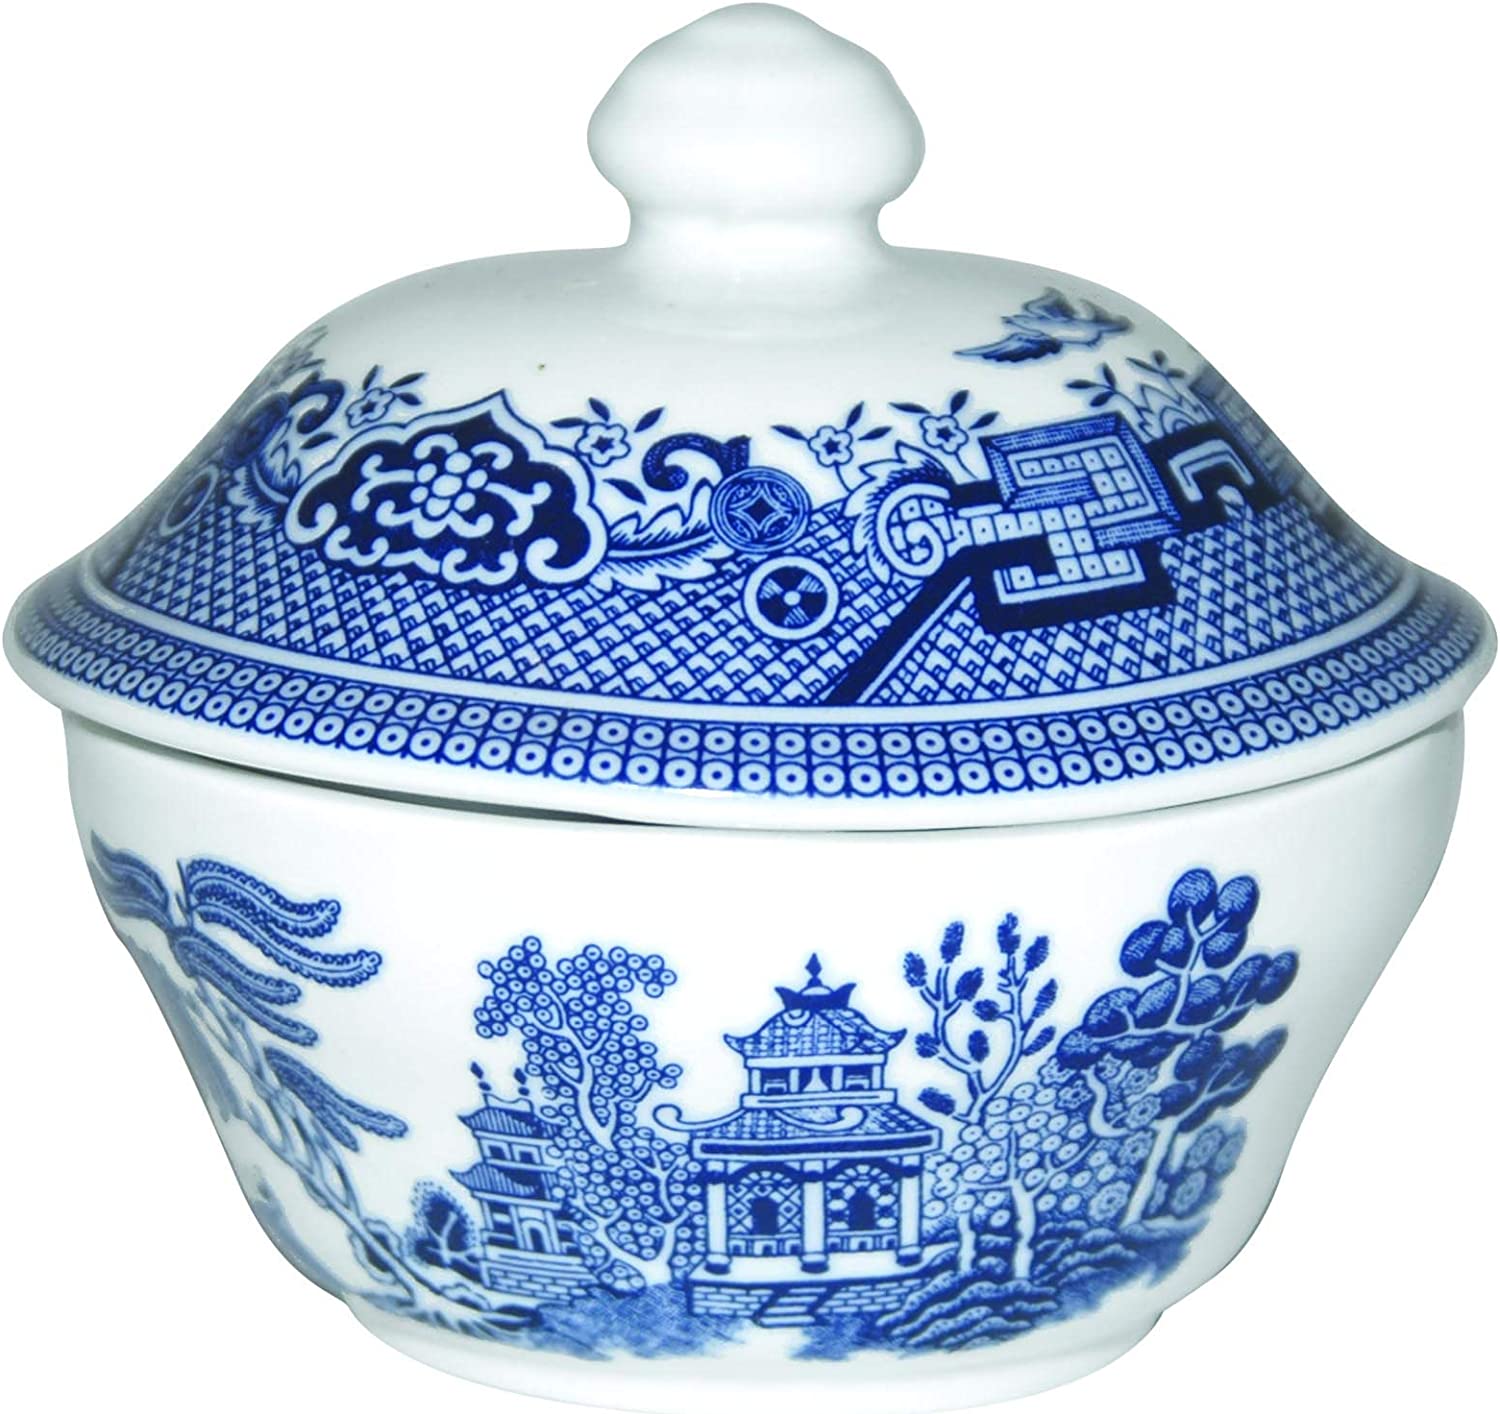 Churchill Fine China Earthenware Covered Sugar Bowl, 5.5 Inches, Blue Willow